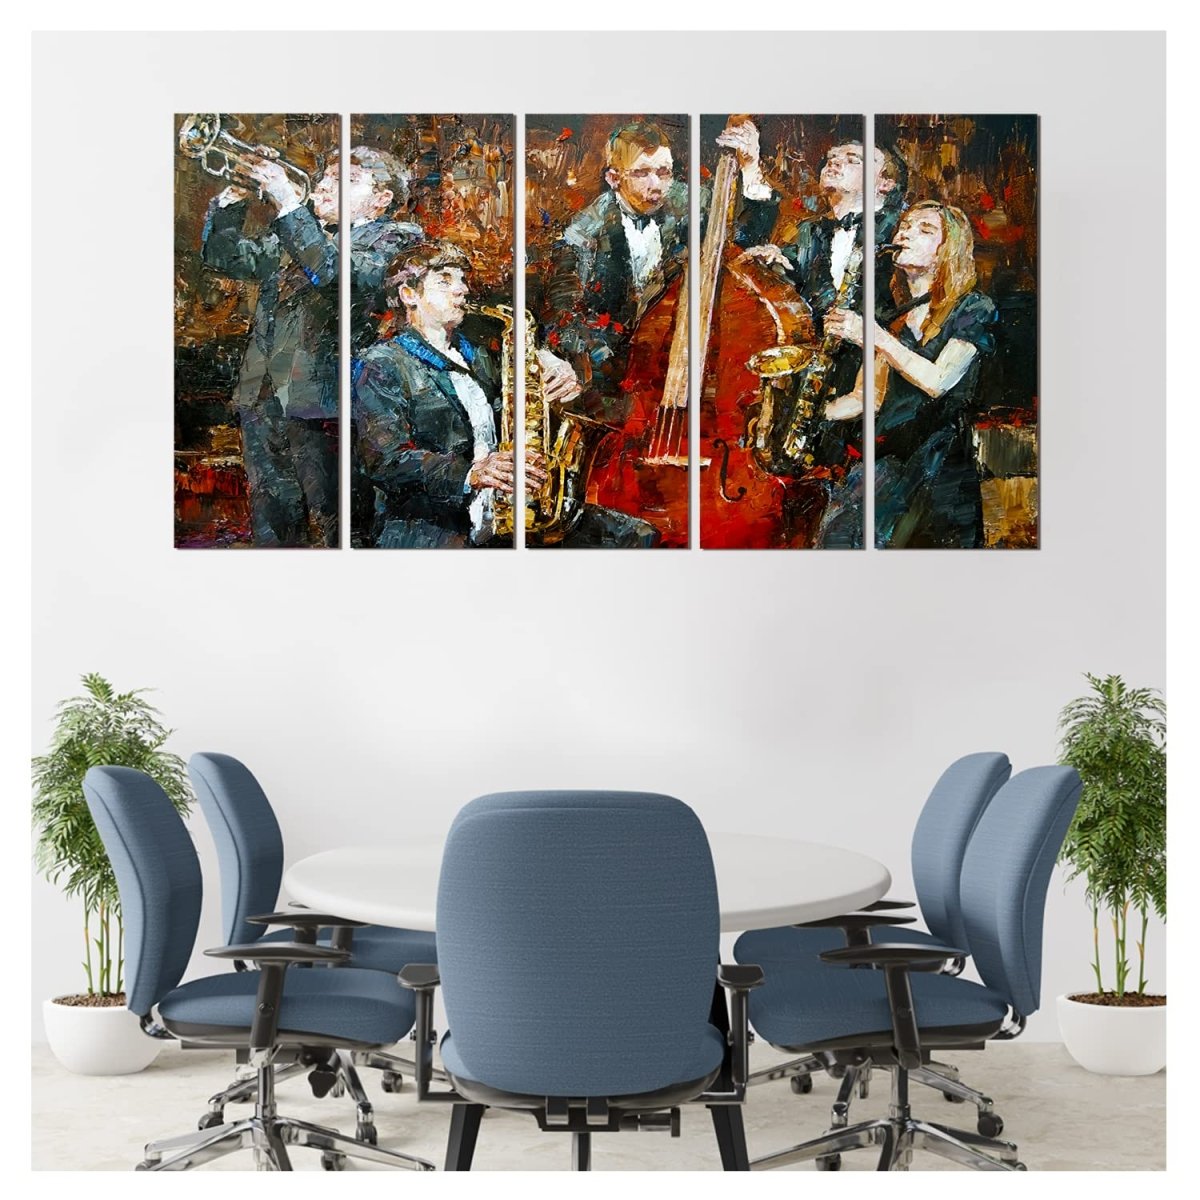 Metalkart Special Band of Maestro Wall Painting (Set of 5)